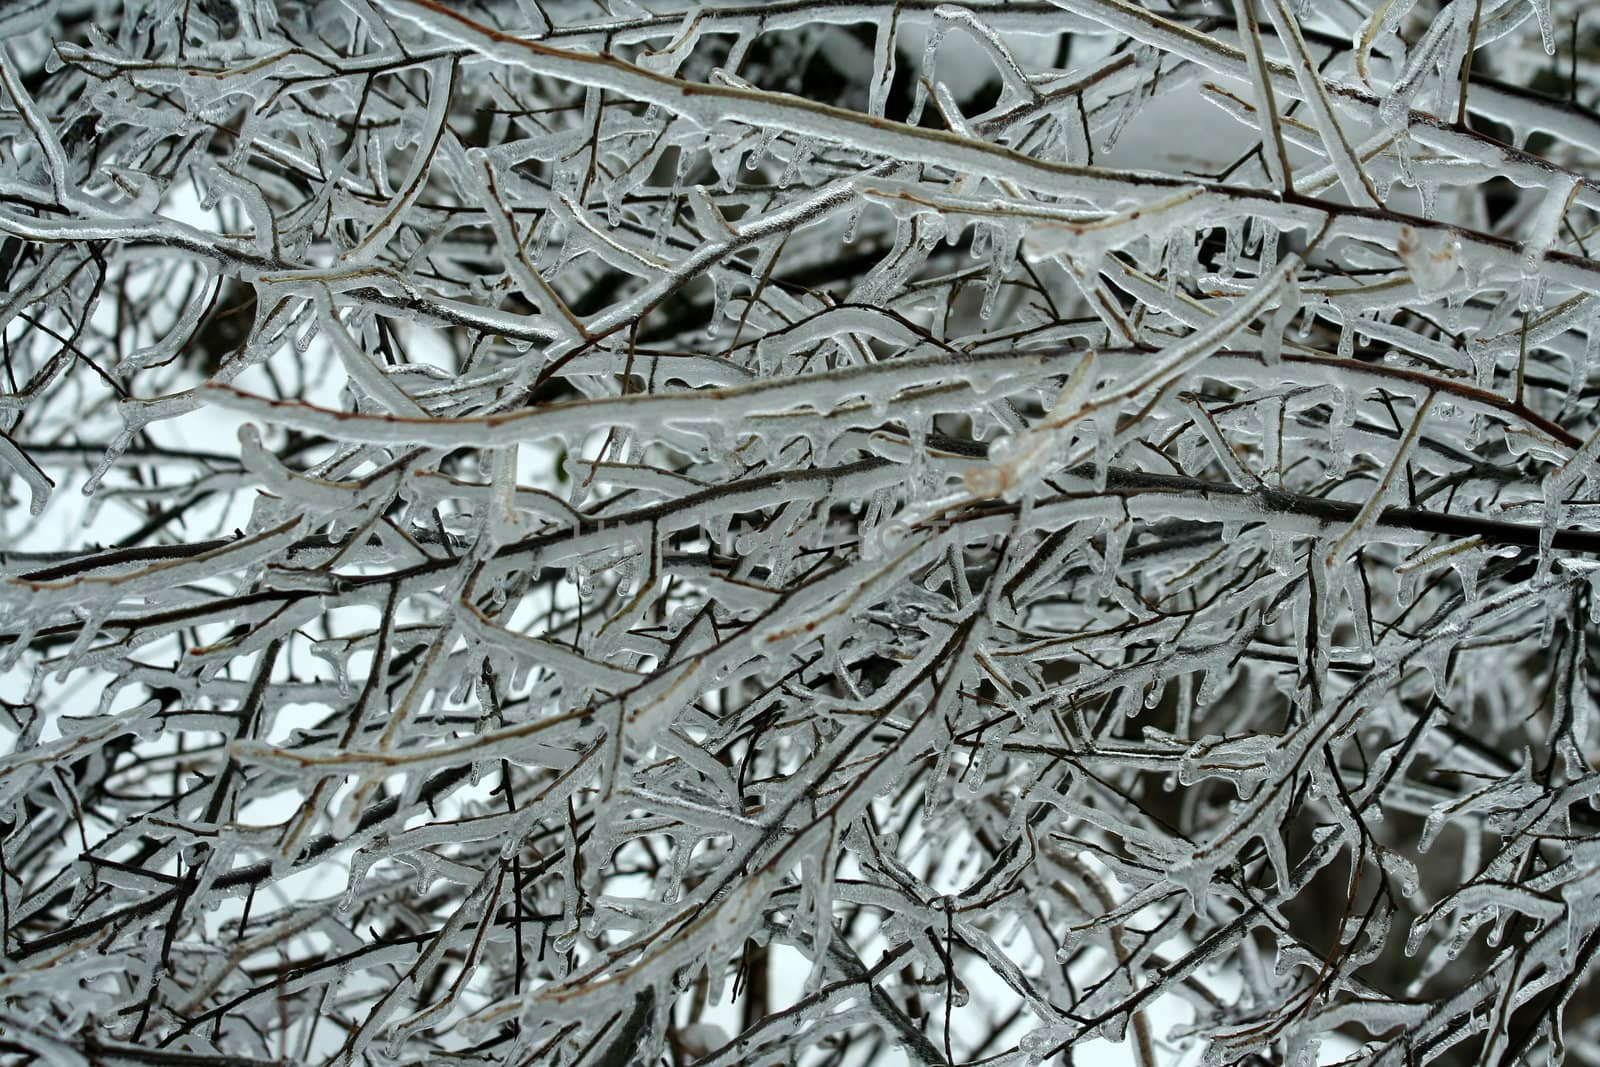 Some Ice coated tree branches